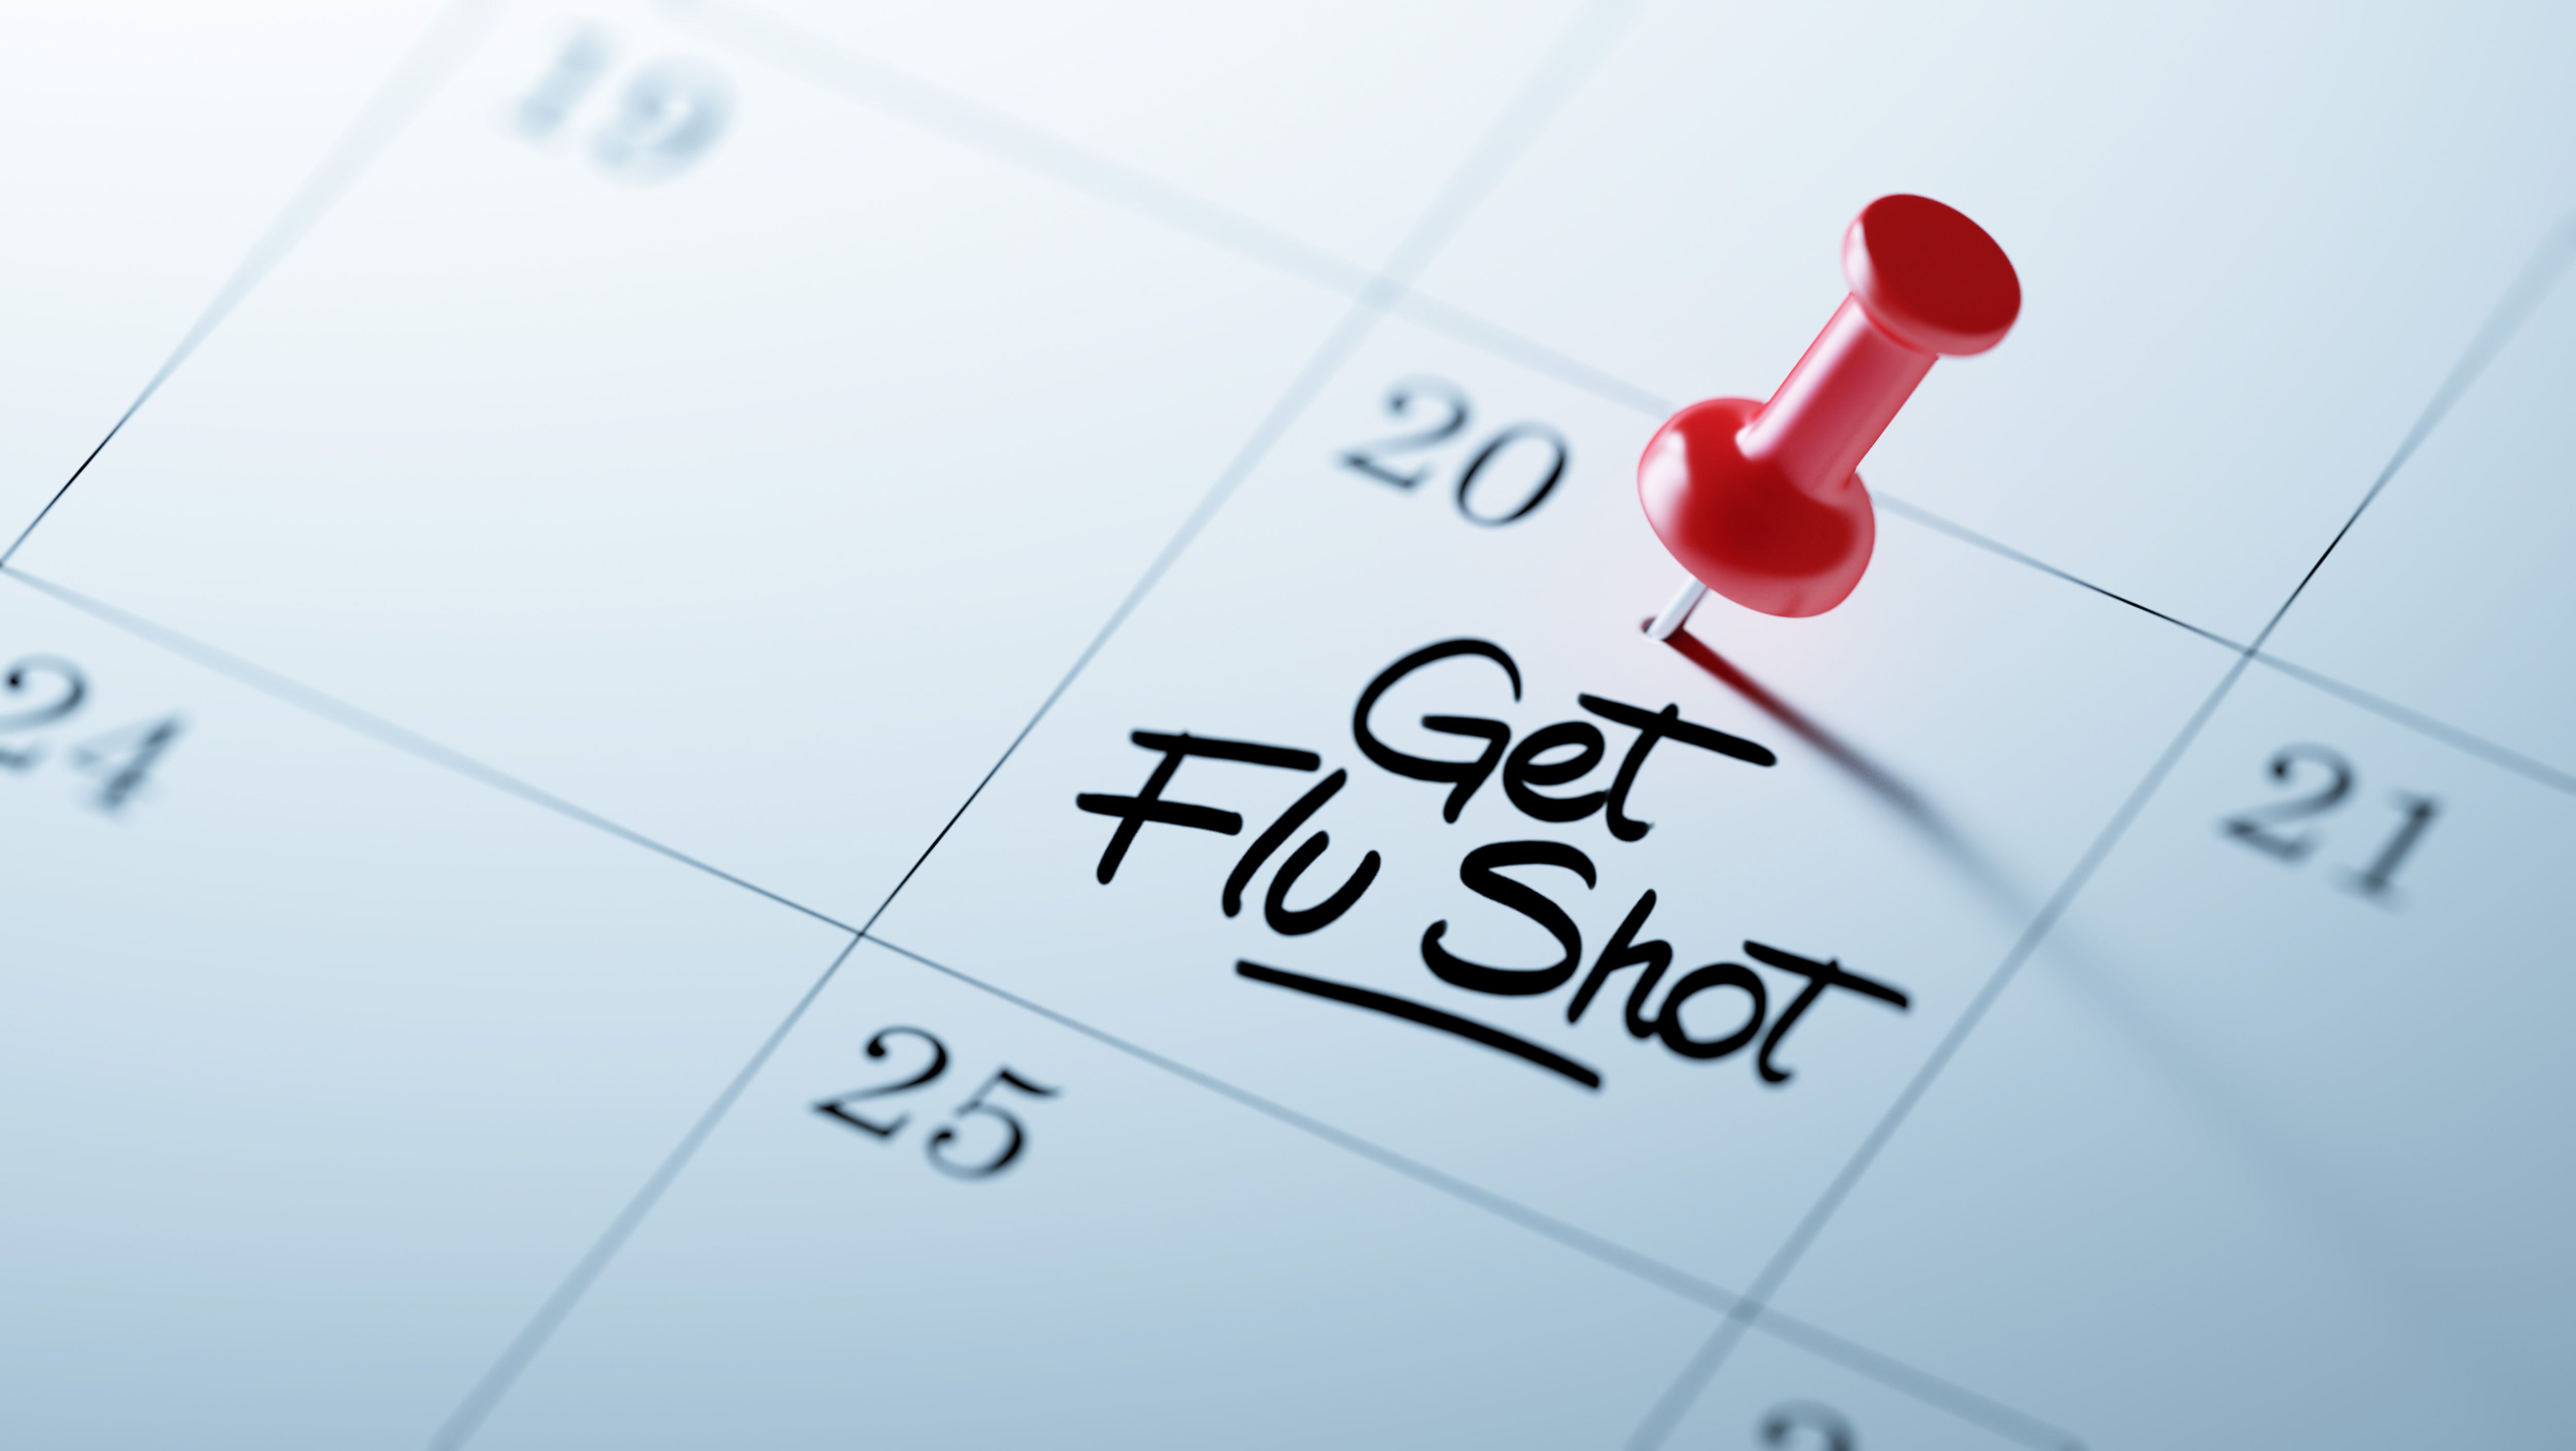 Get your flu shot picture